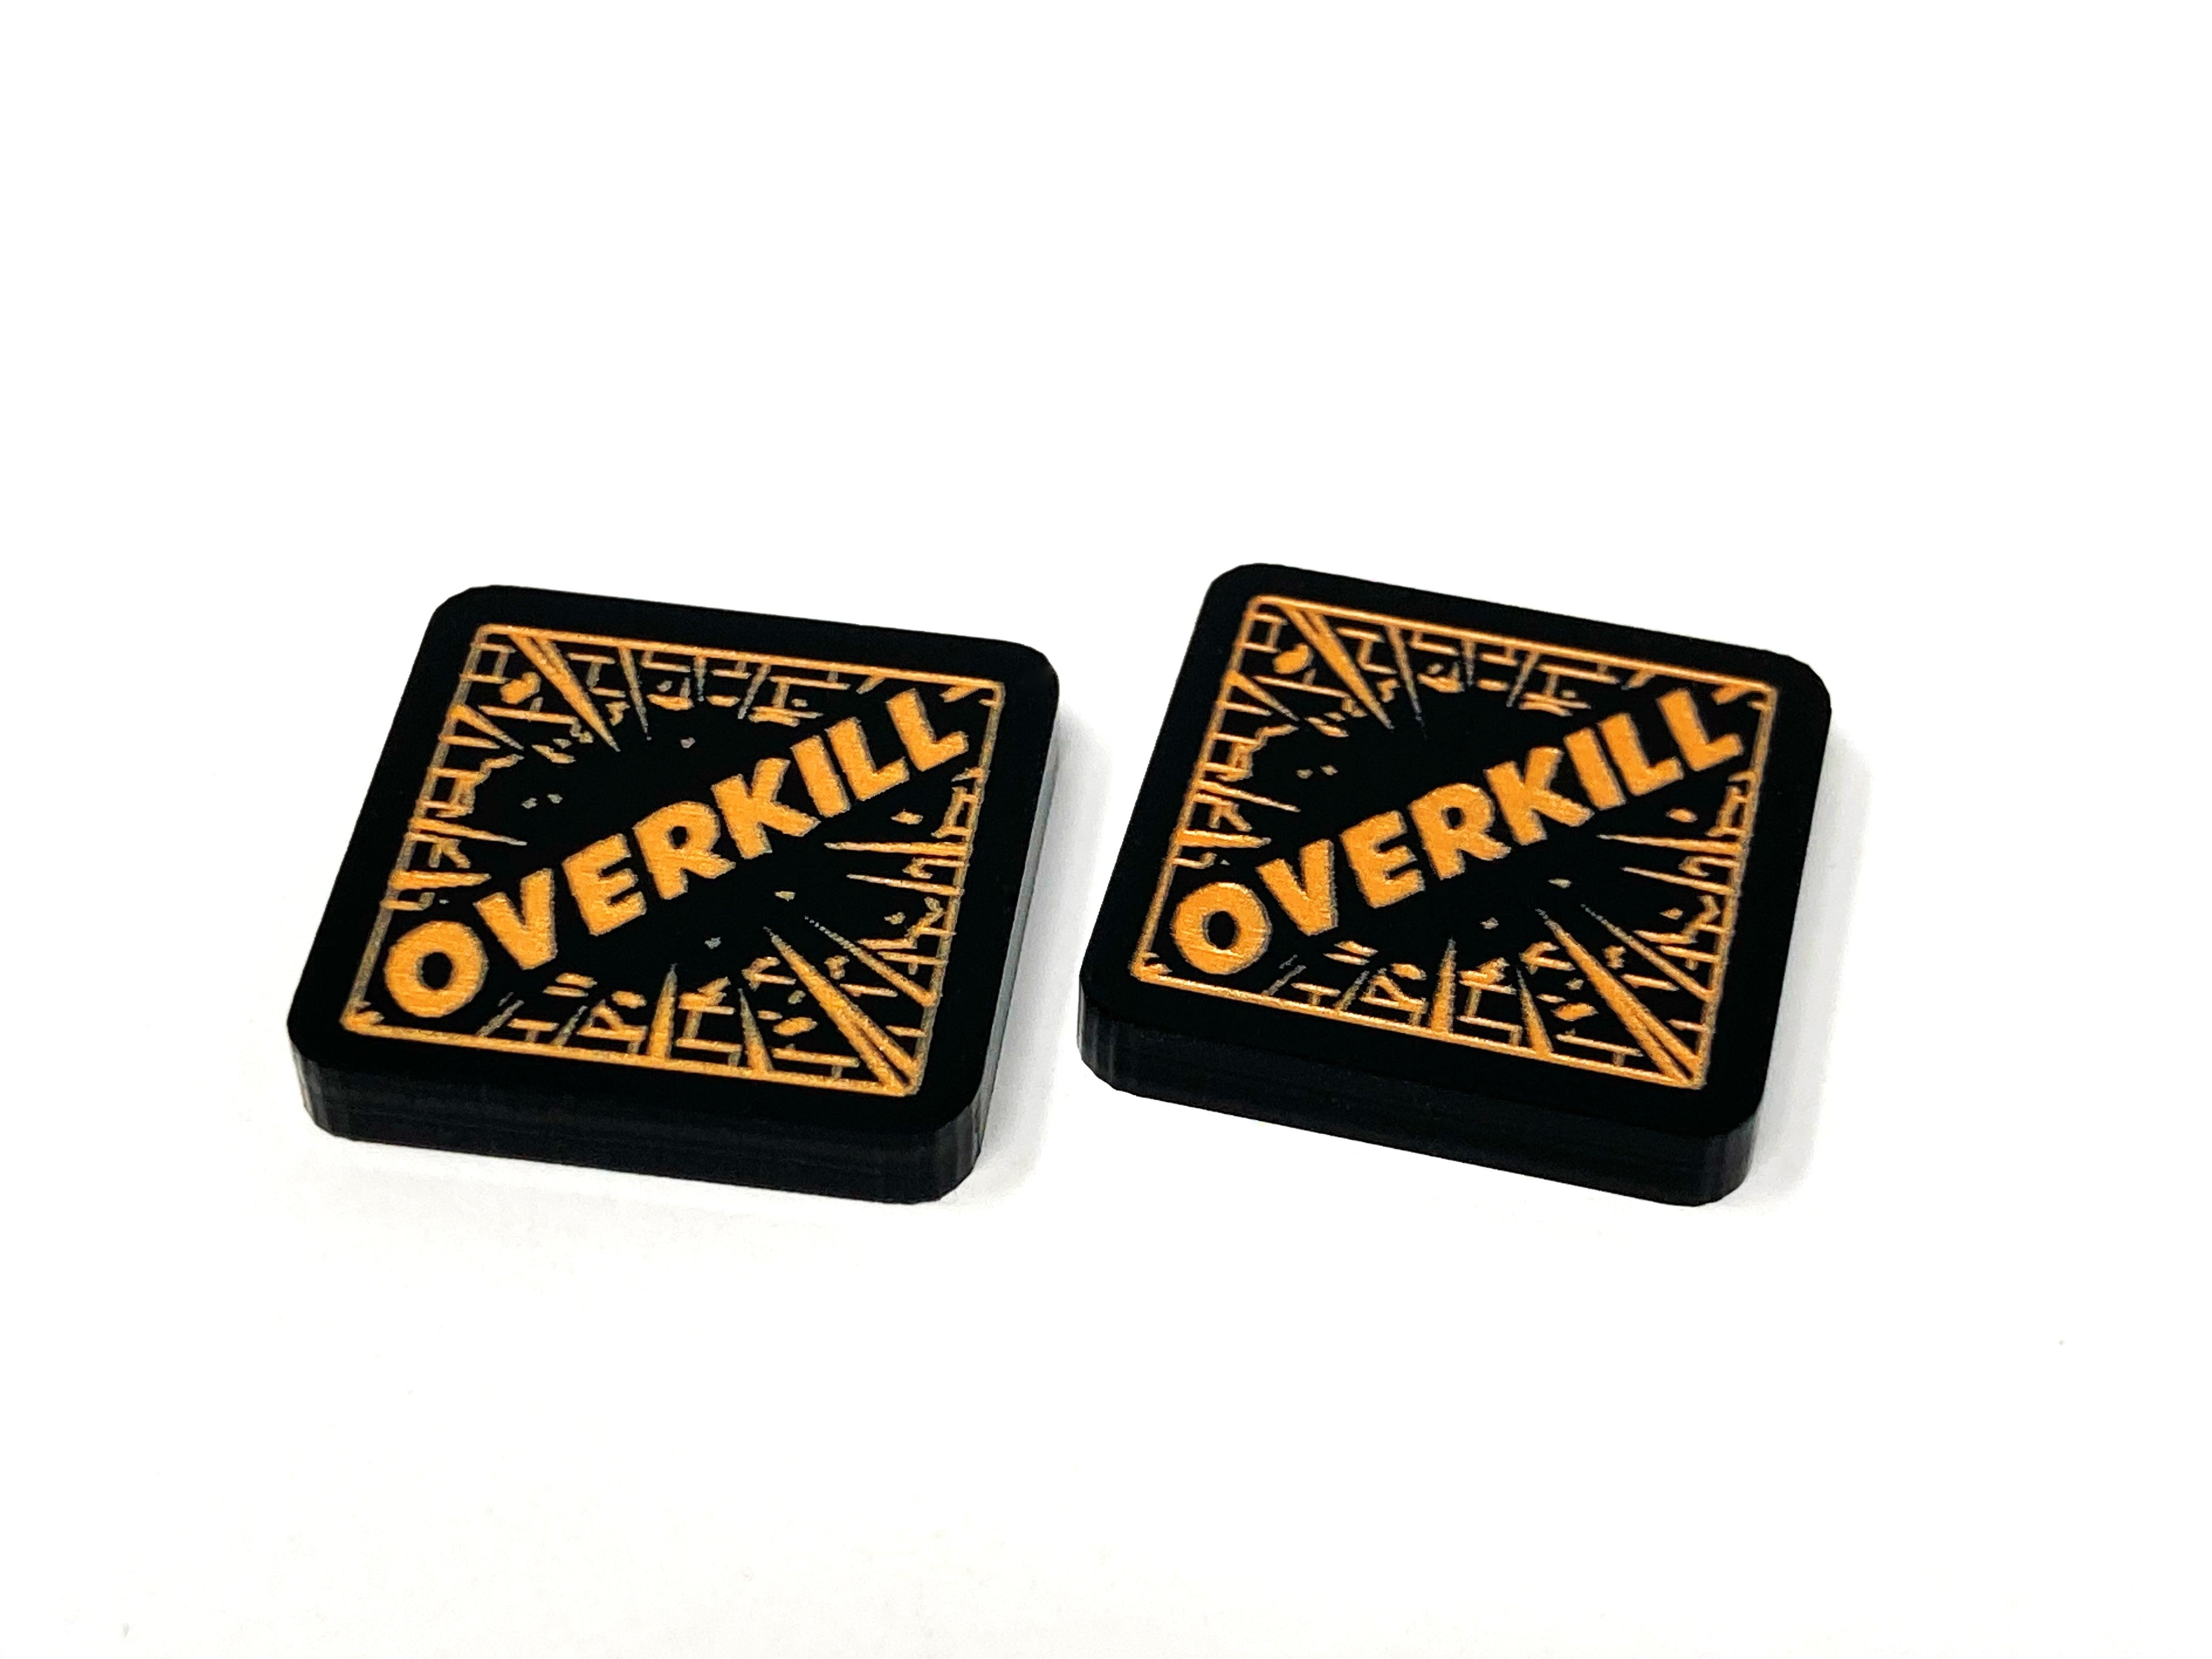 Overkill Condition Tokens